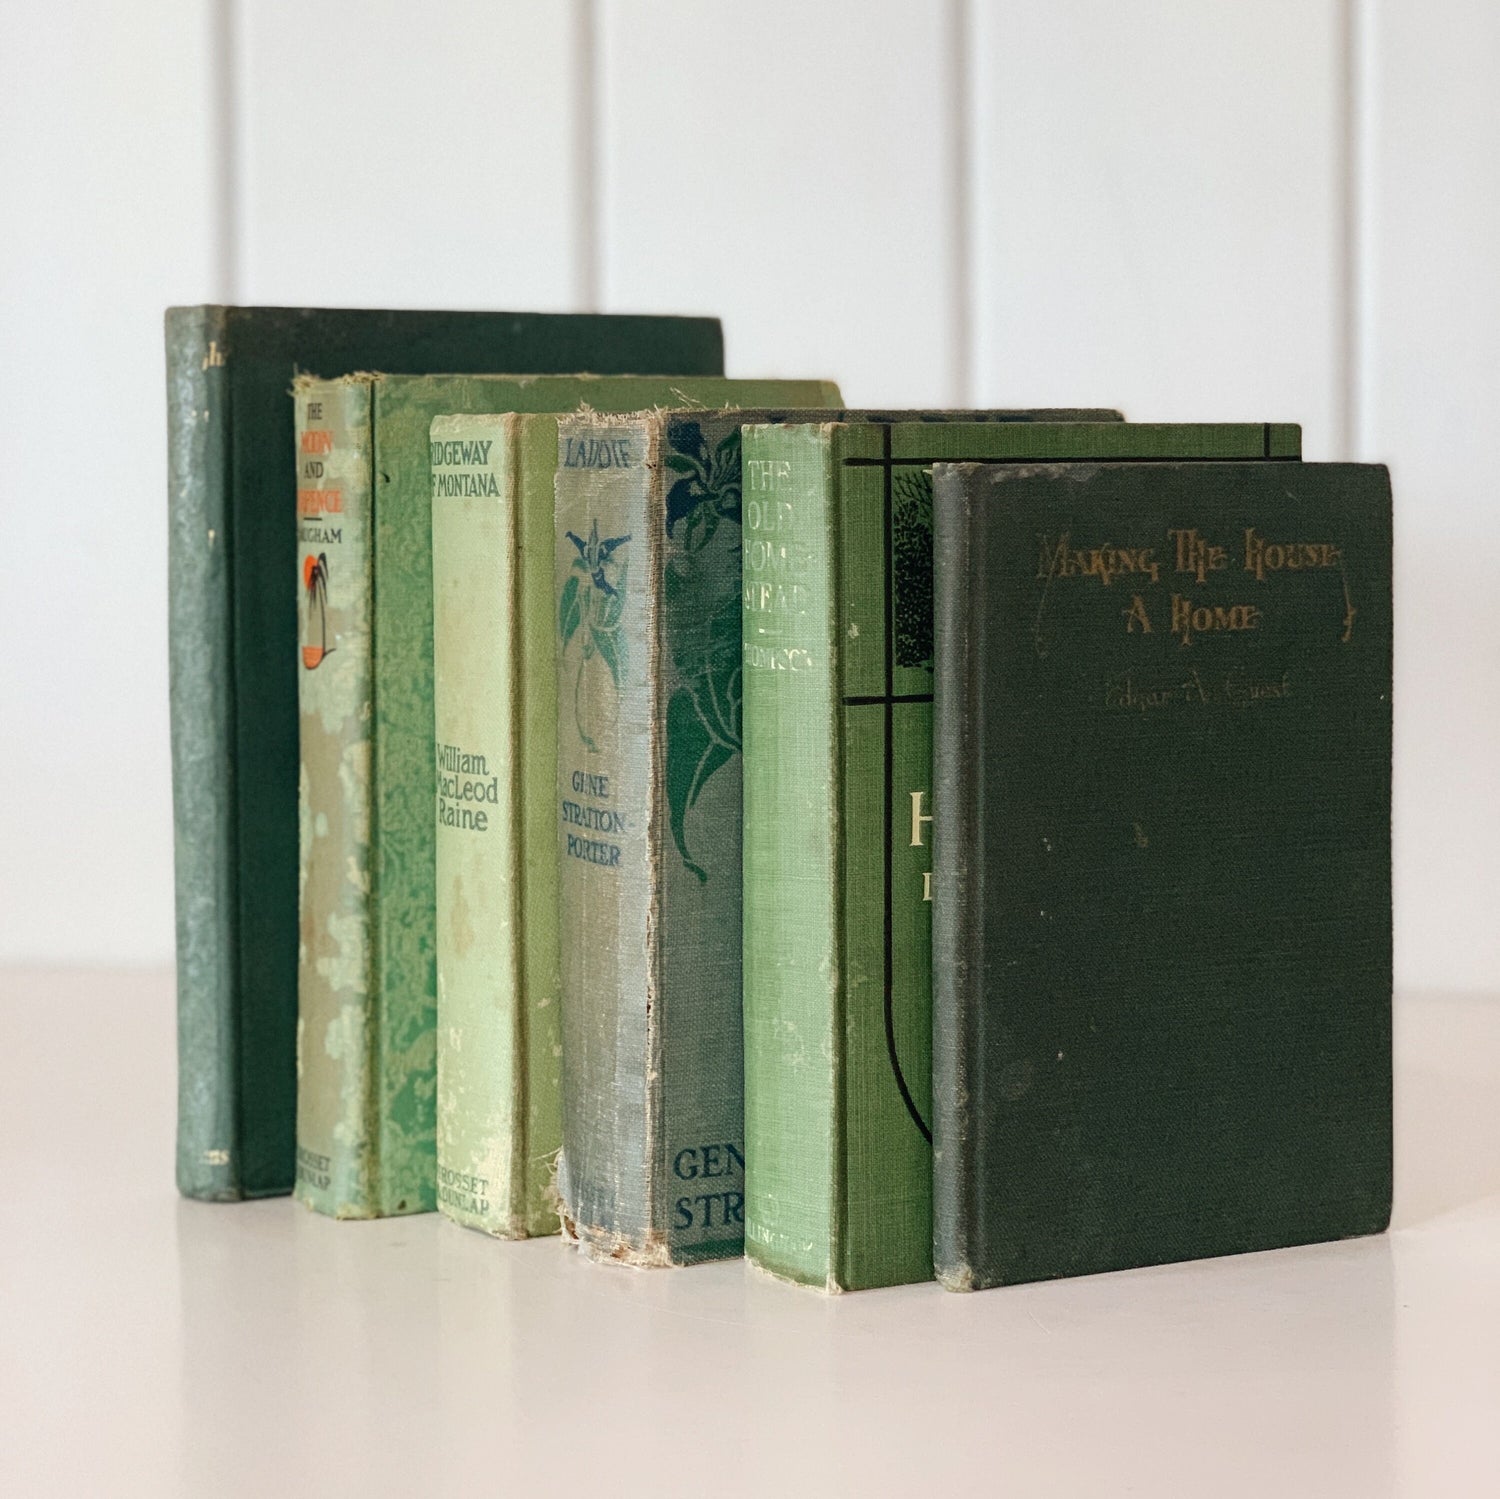 Antique and Vintage Shabby Distressed Green Distressed Books for Display, Handmade Decor